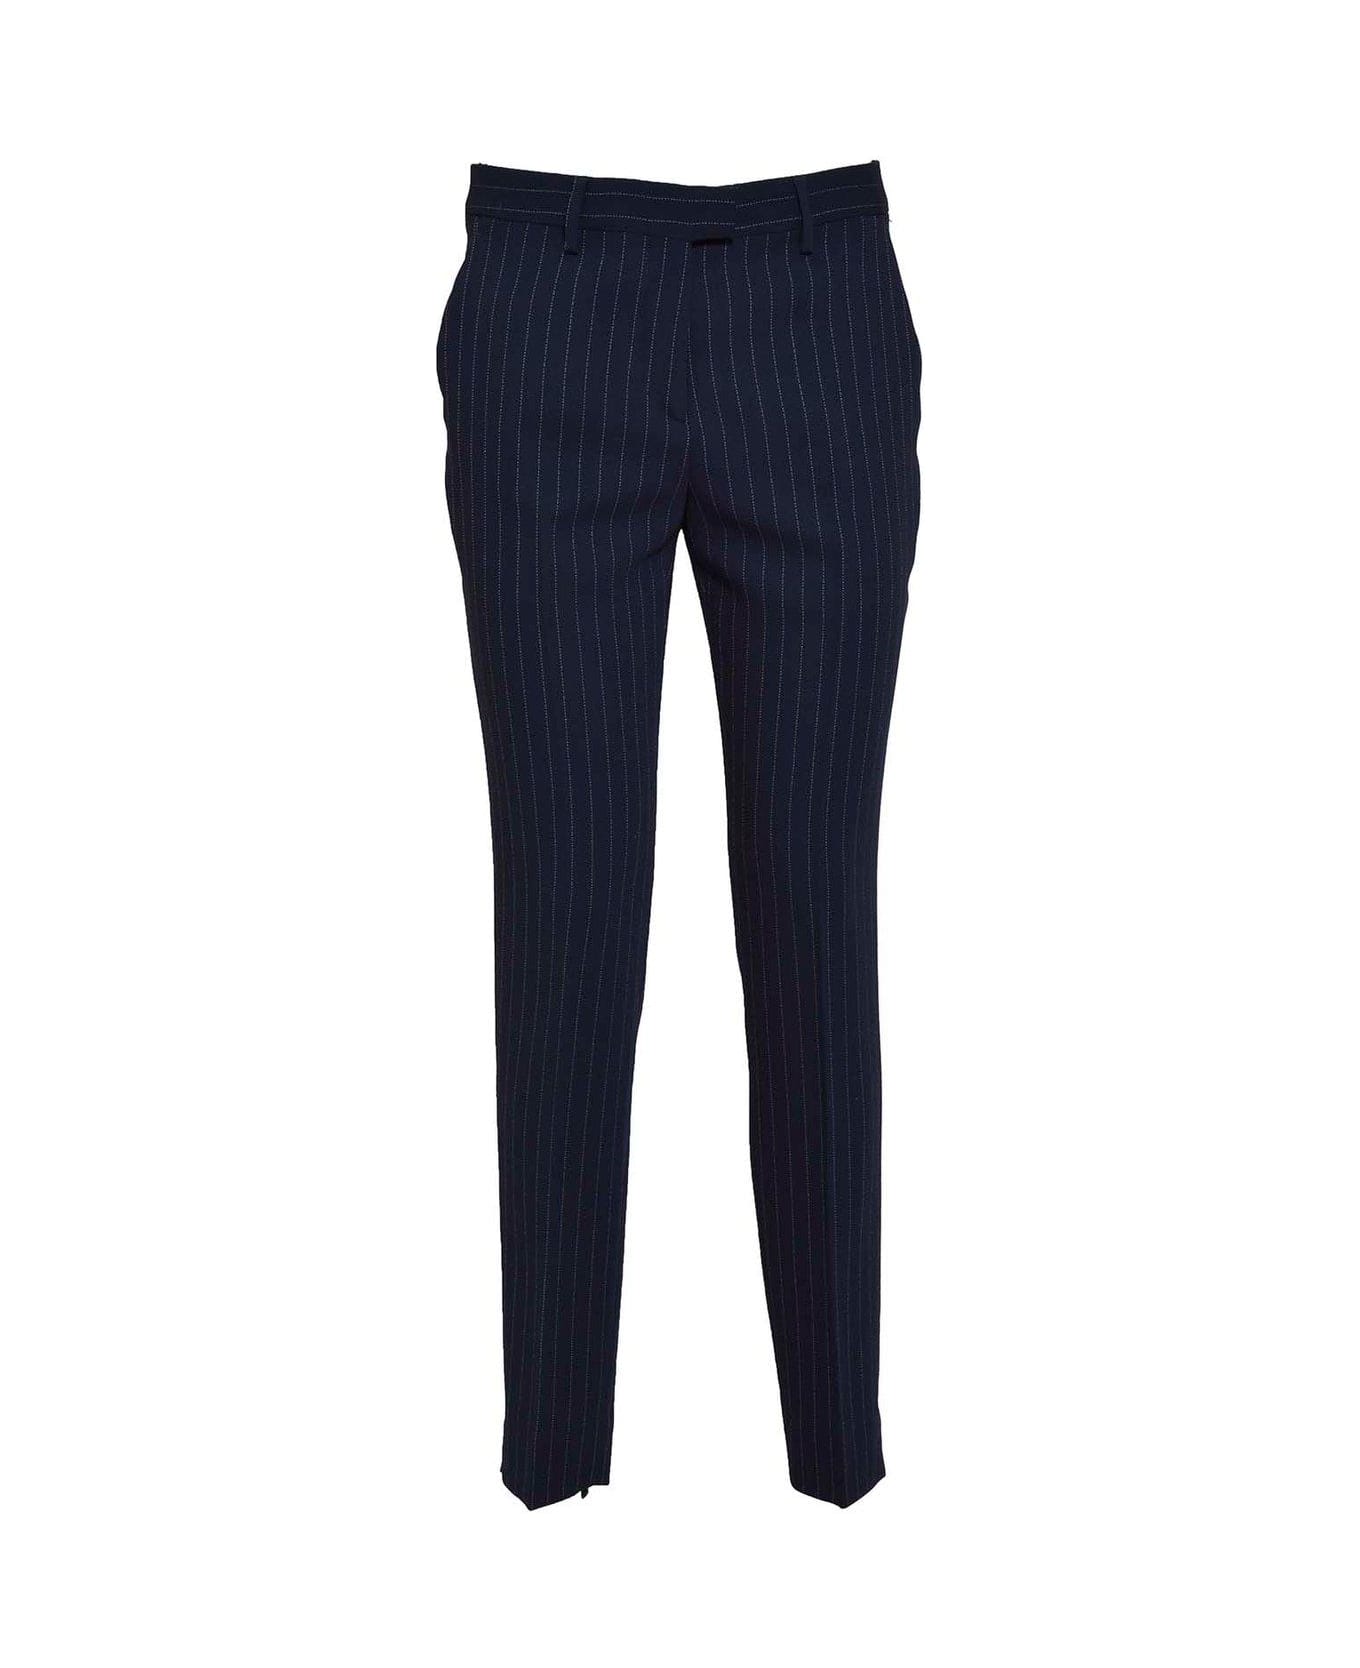 Etro Striped Tailored Trousers - Blu ボトムス